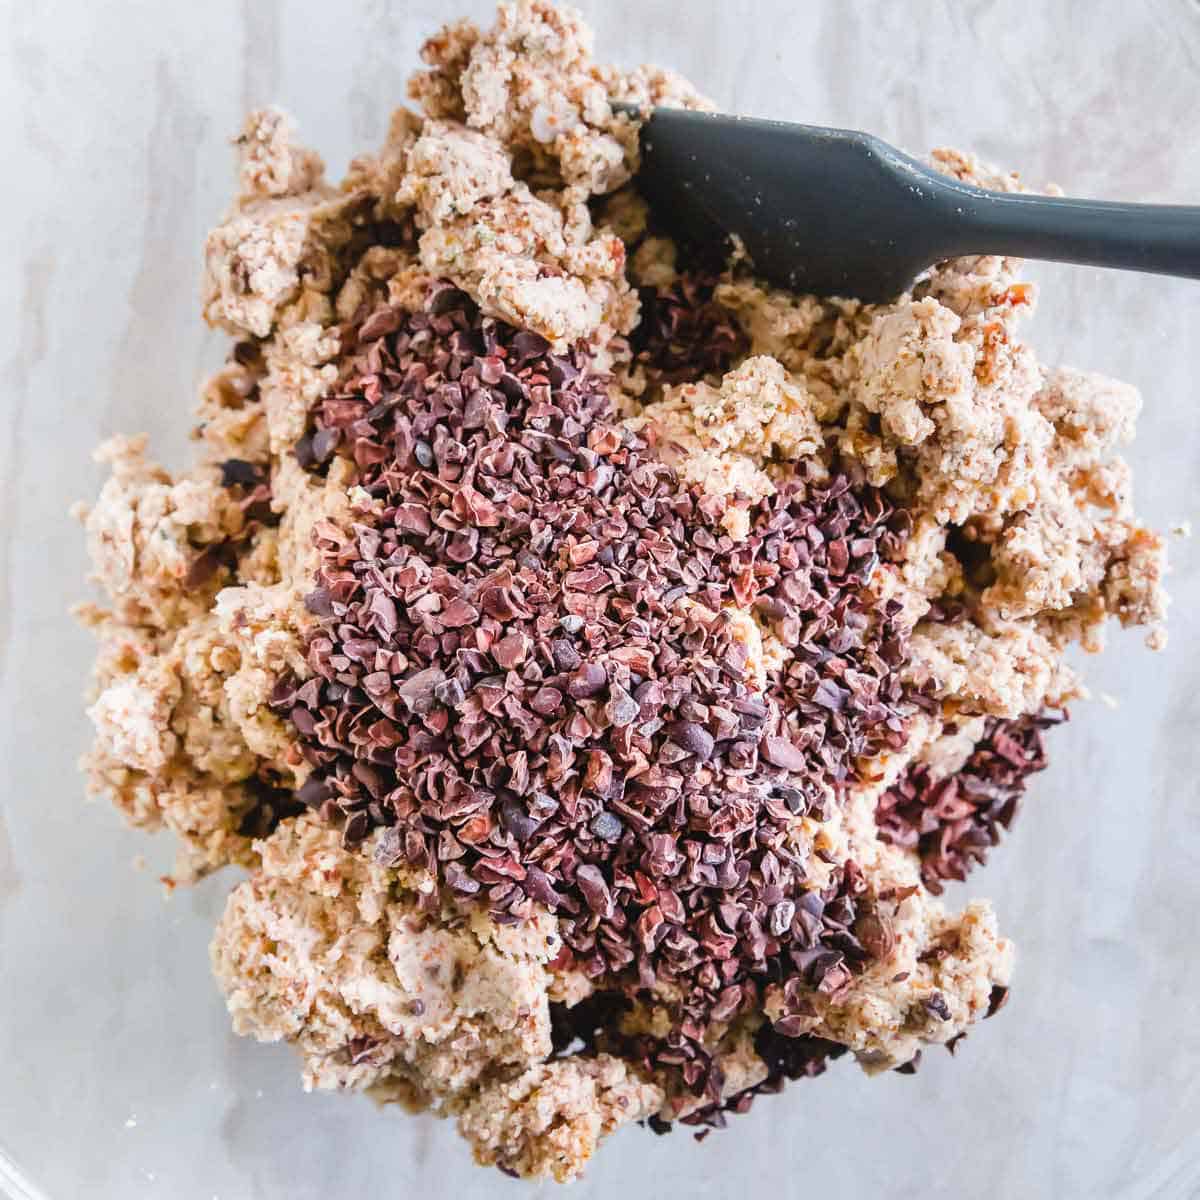 Healthy, edible cookie dough is a delicious gluten-free, vegan treat you can eat by the spoonful or roll into balls for easy snacking.